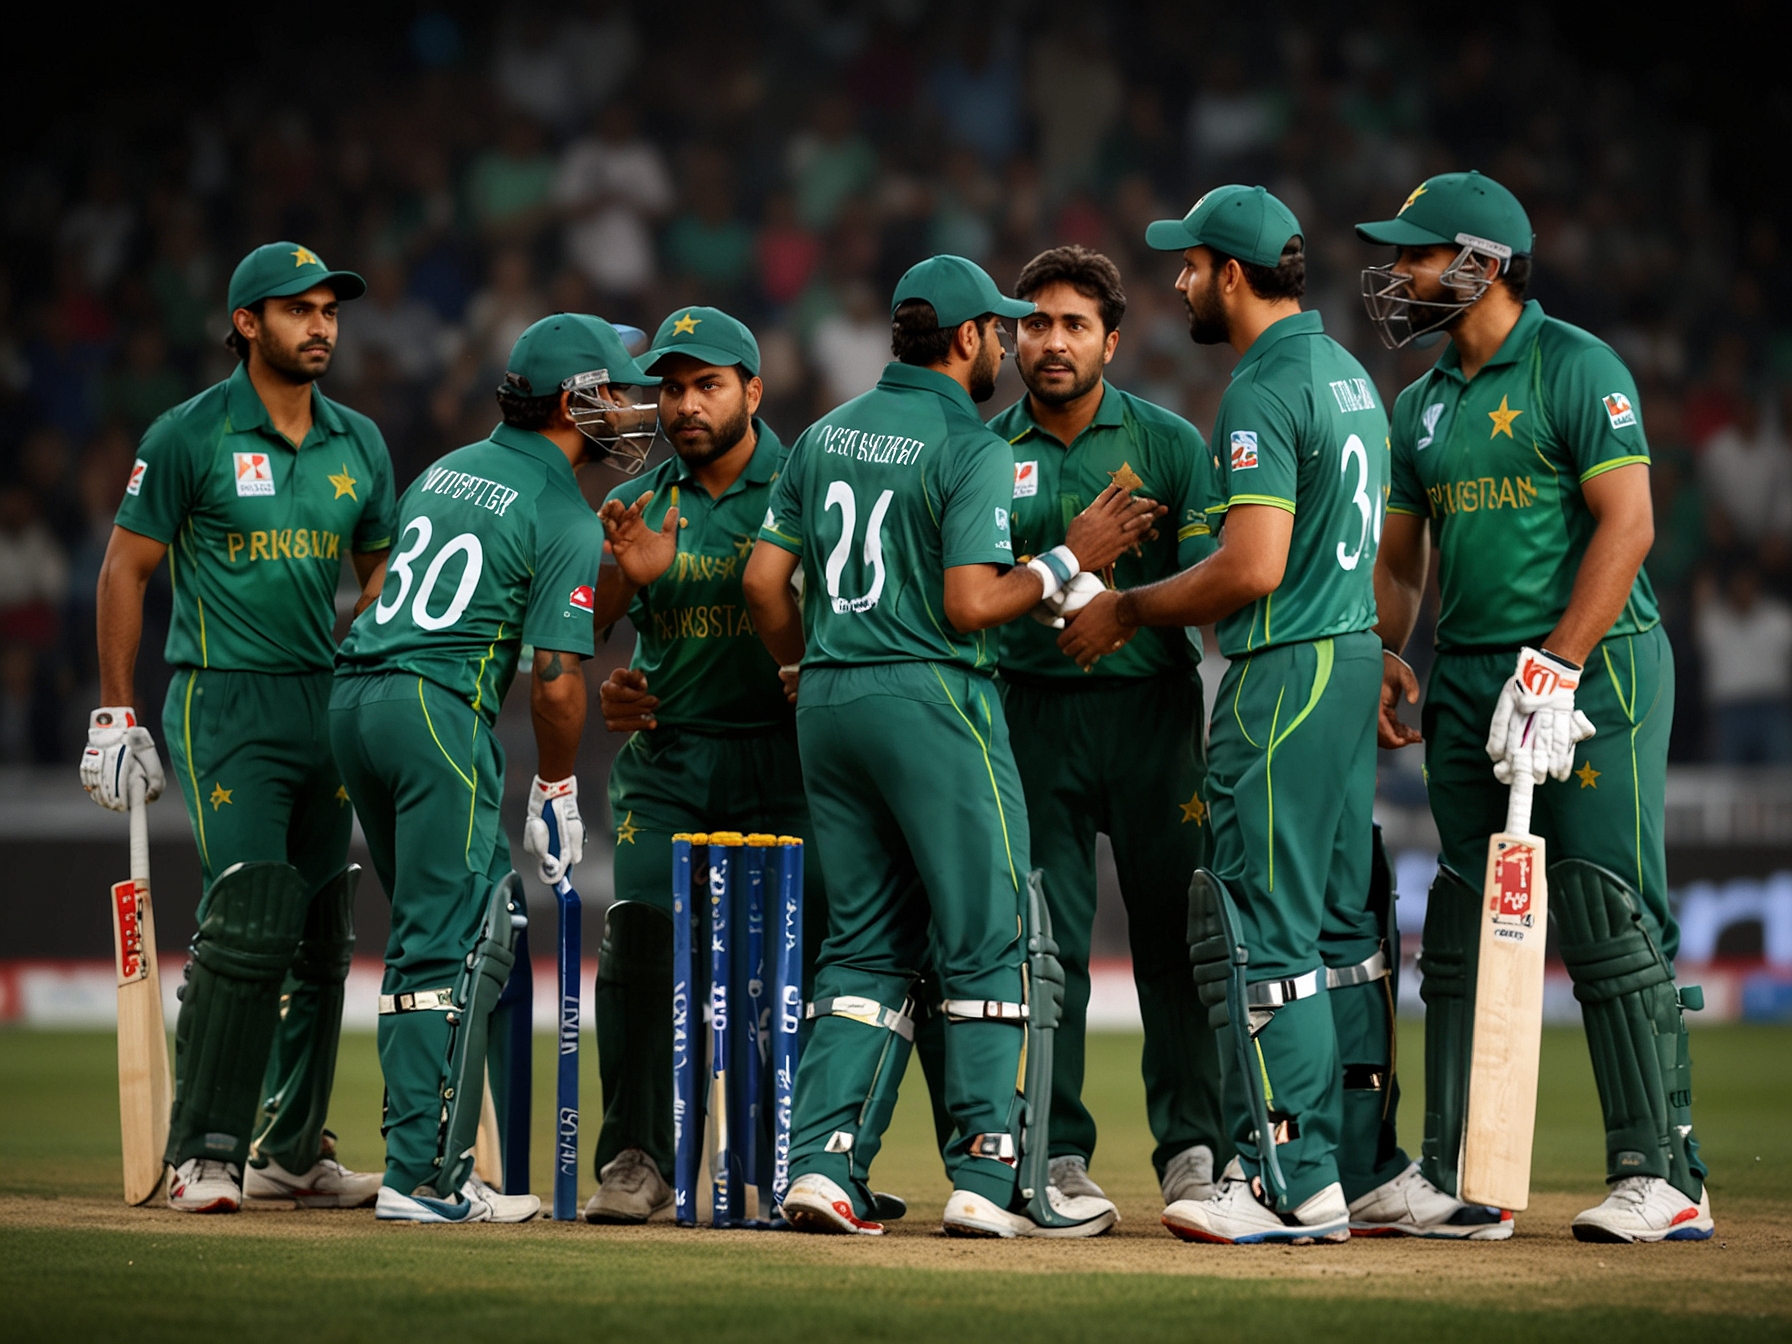 Pakistani cricket team during a critical T20 World Cup match, showcasing the senior players in action. The image highlights the team's struggle and moments of strategic failure.